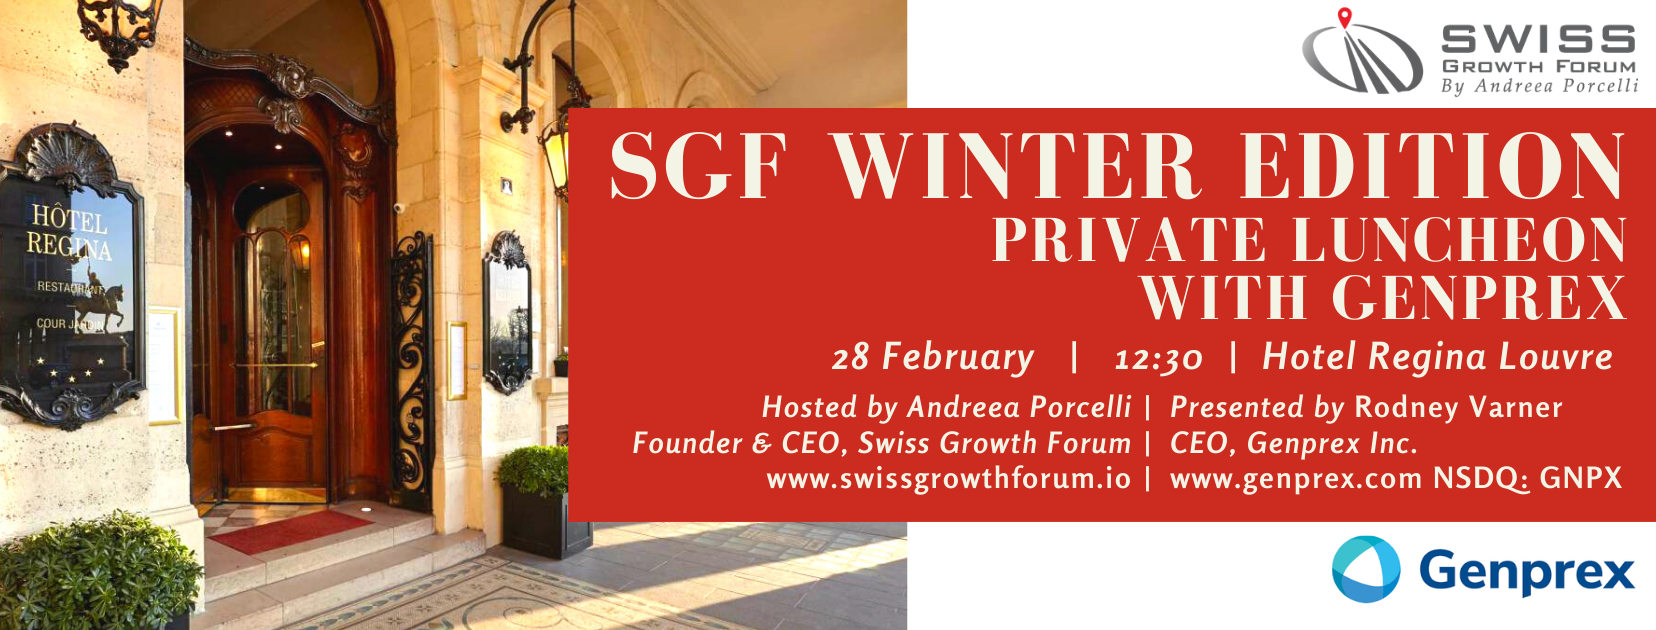 SGF Winter Edition 2020 Private Luncheon with Genprex in Paris organized by Swiss Growth Forum